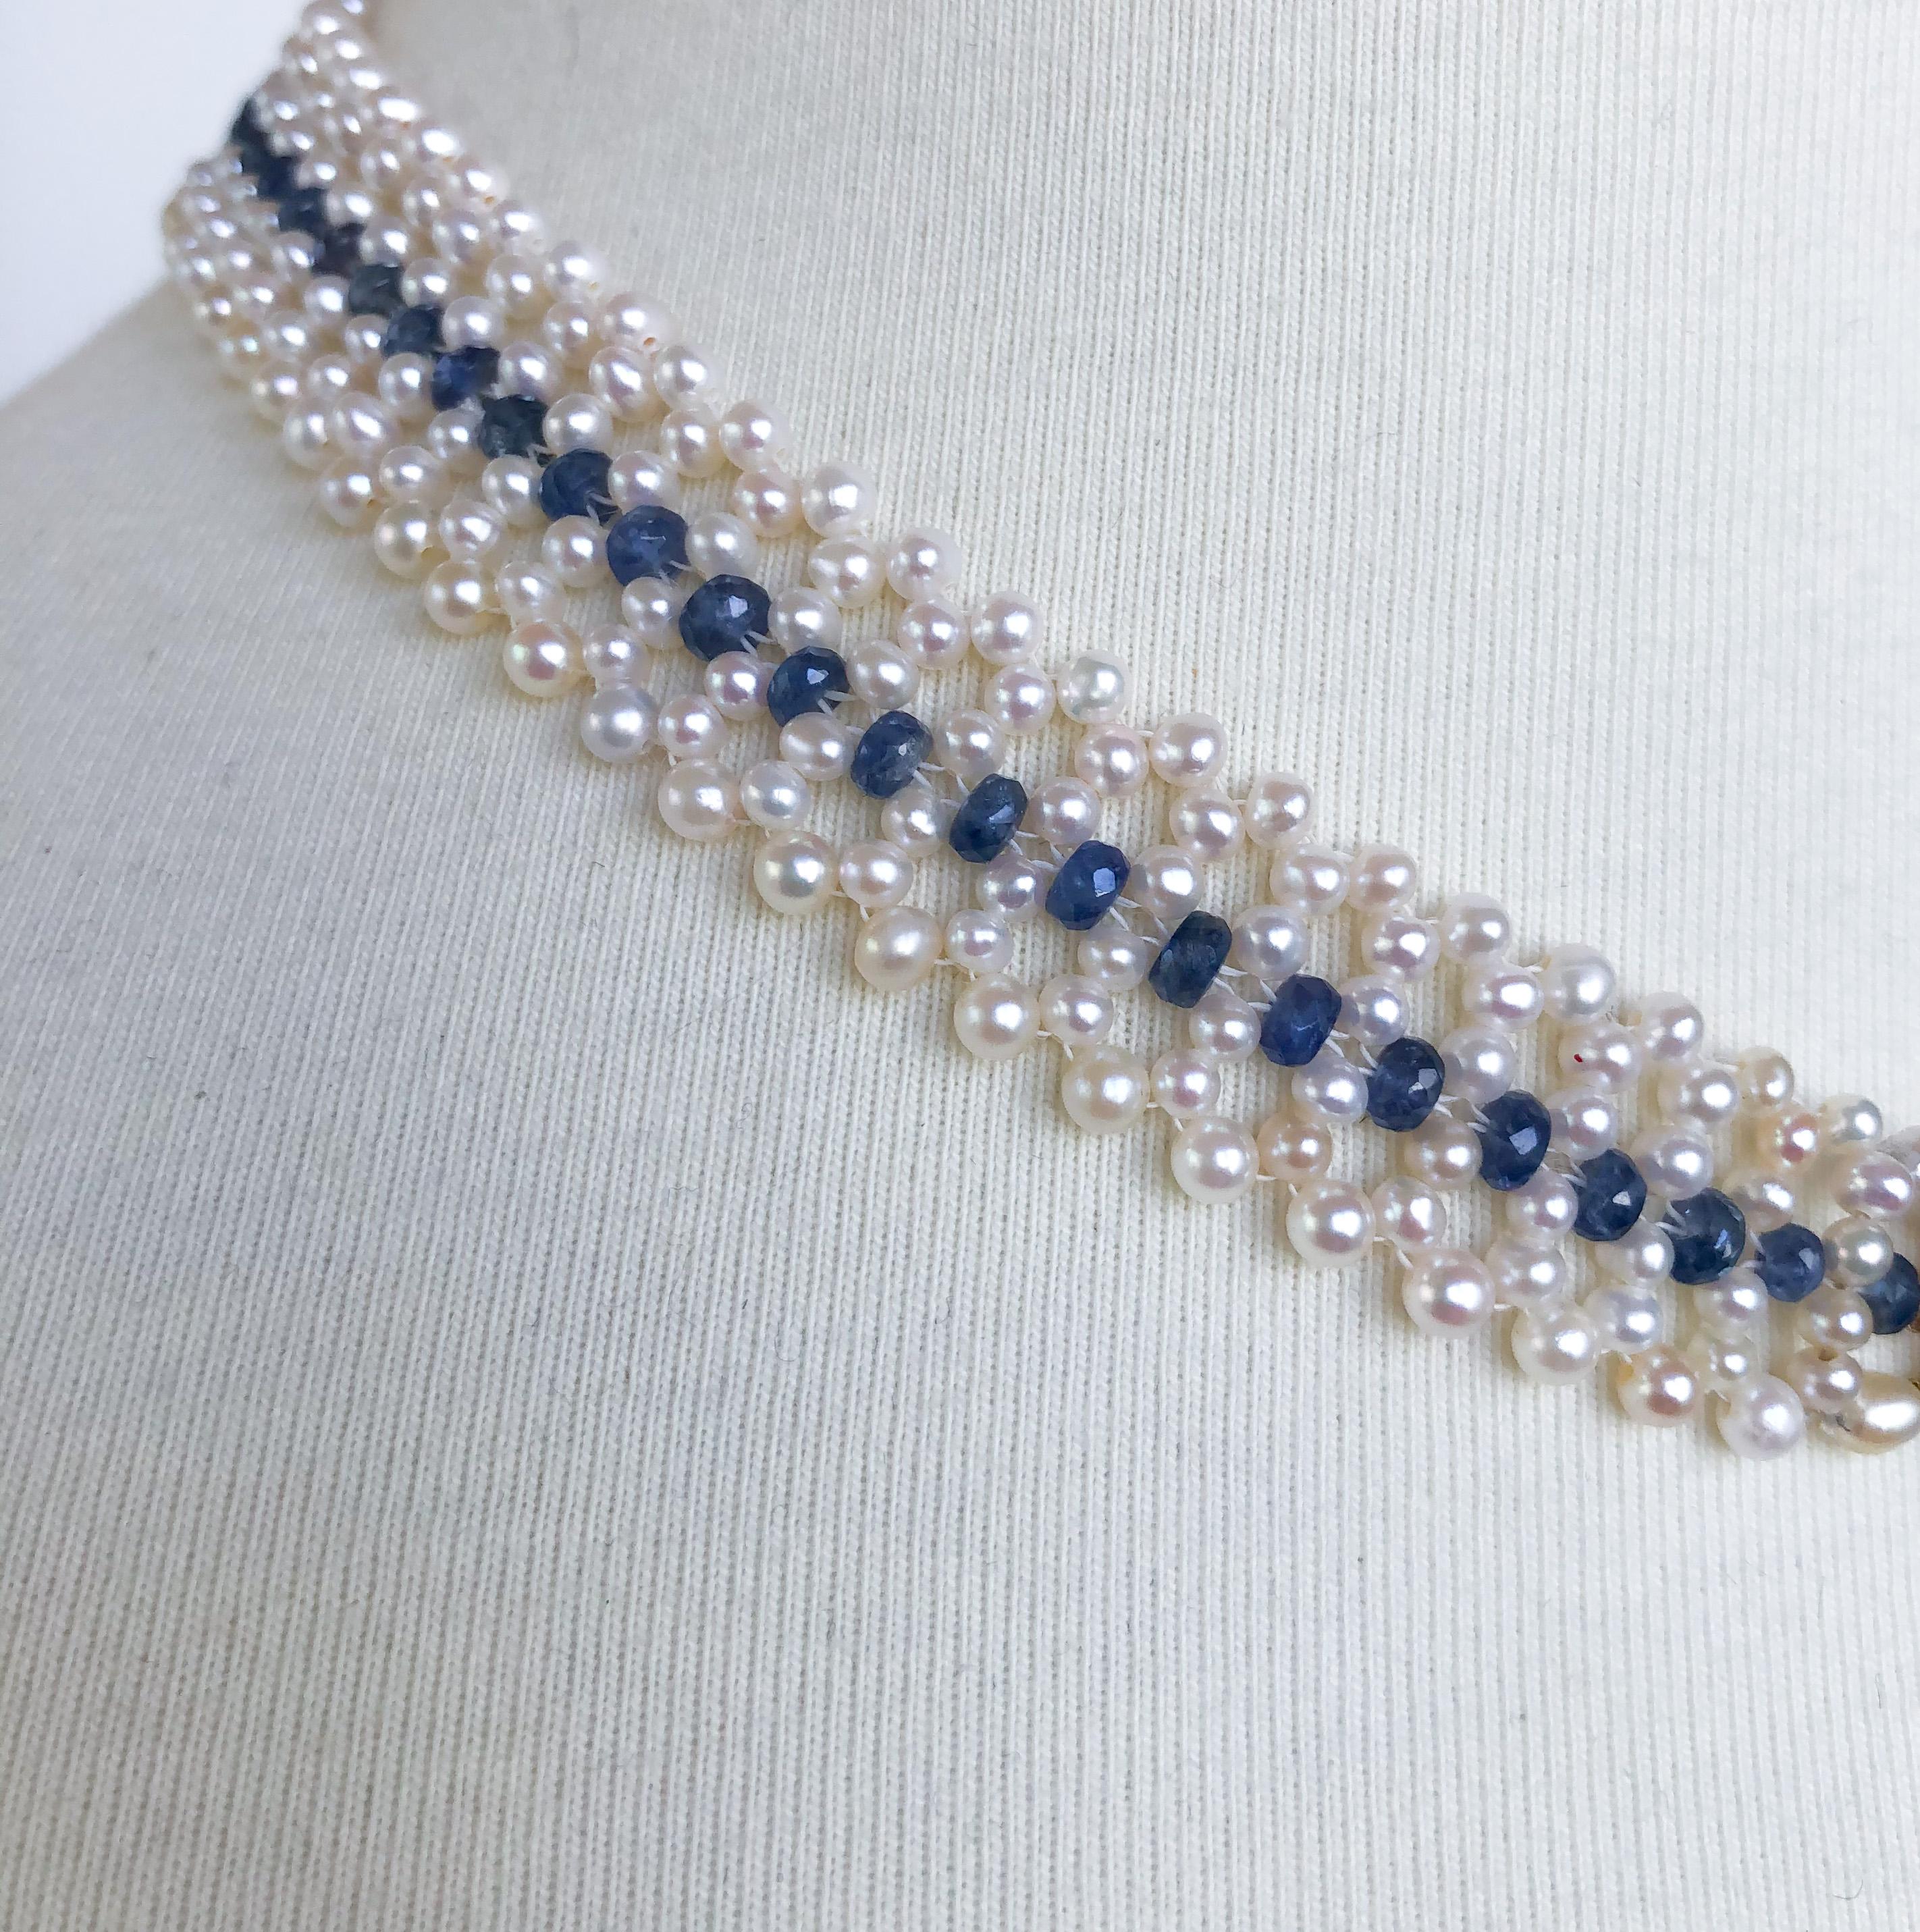 Artisan Marina J. Woven Pearl and Sapphire Necklace with Diamond Centerpiece & 14K Gold